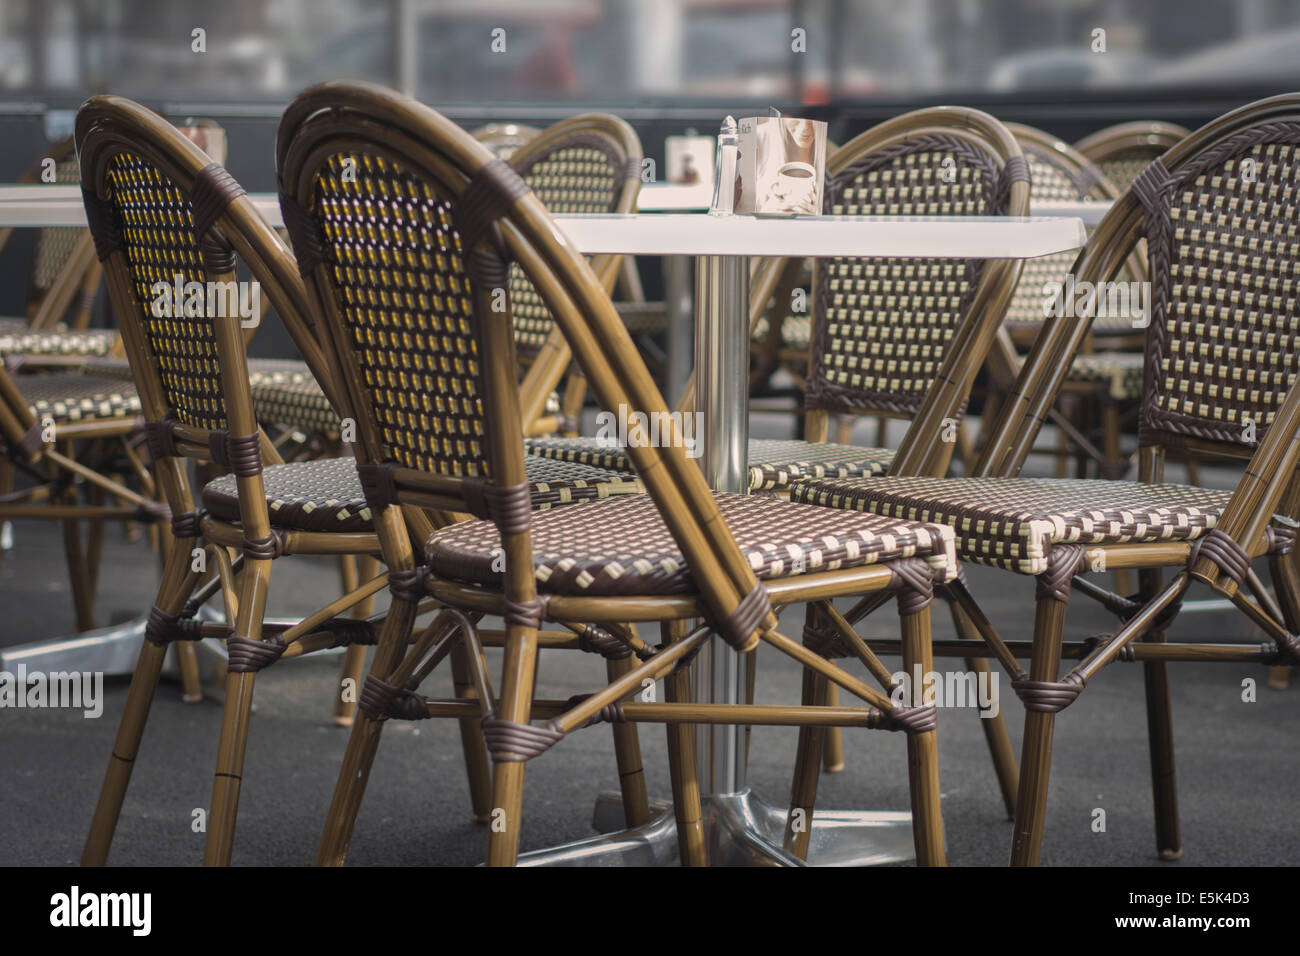 Empty Restaurant Tables and Chairs Stock Photo